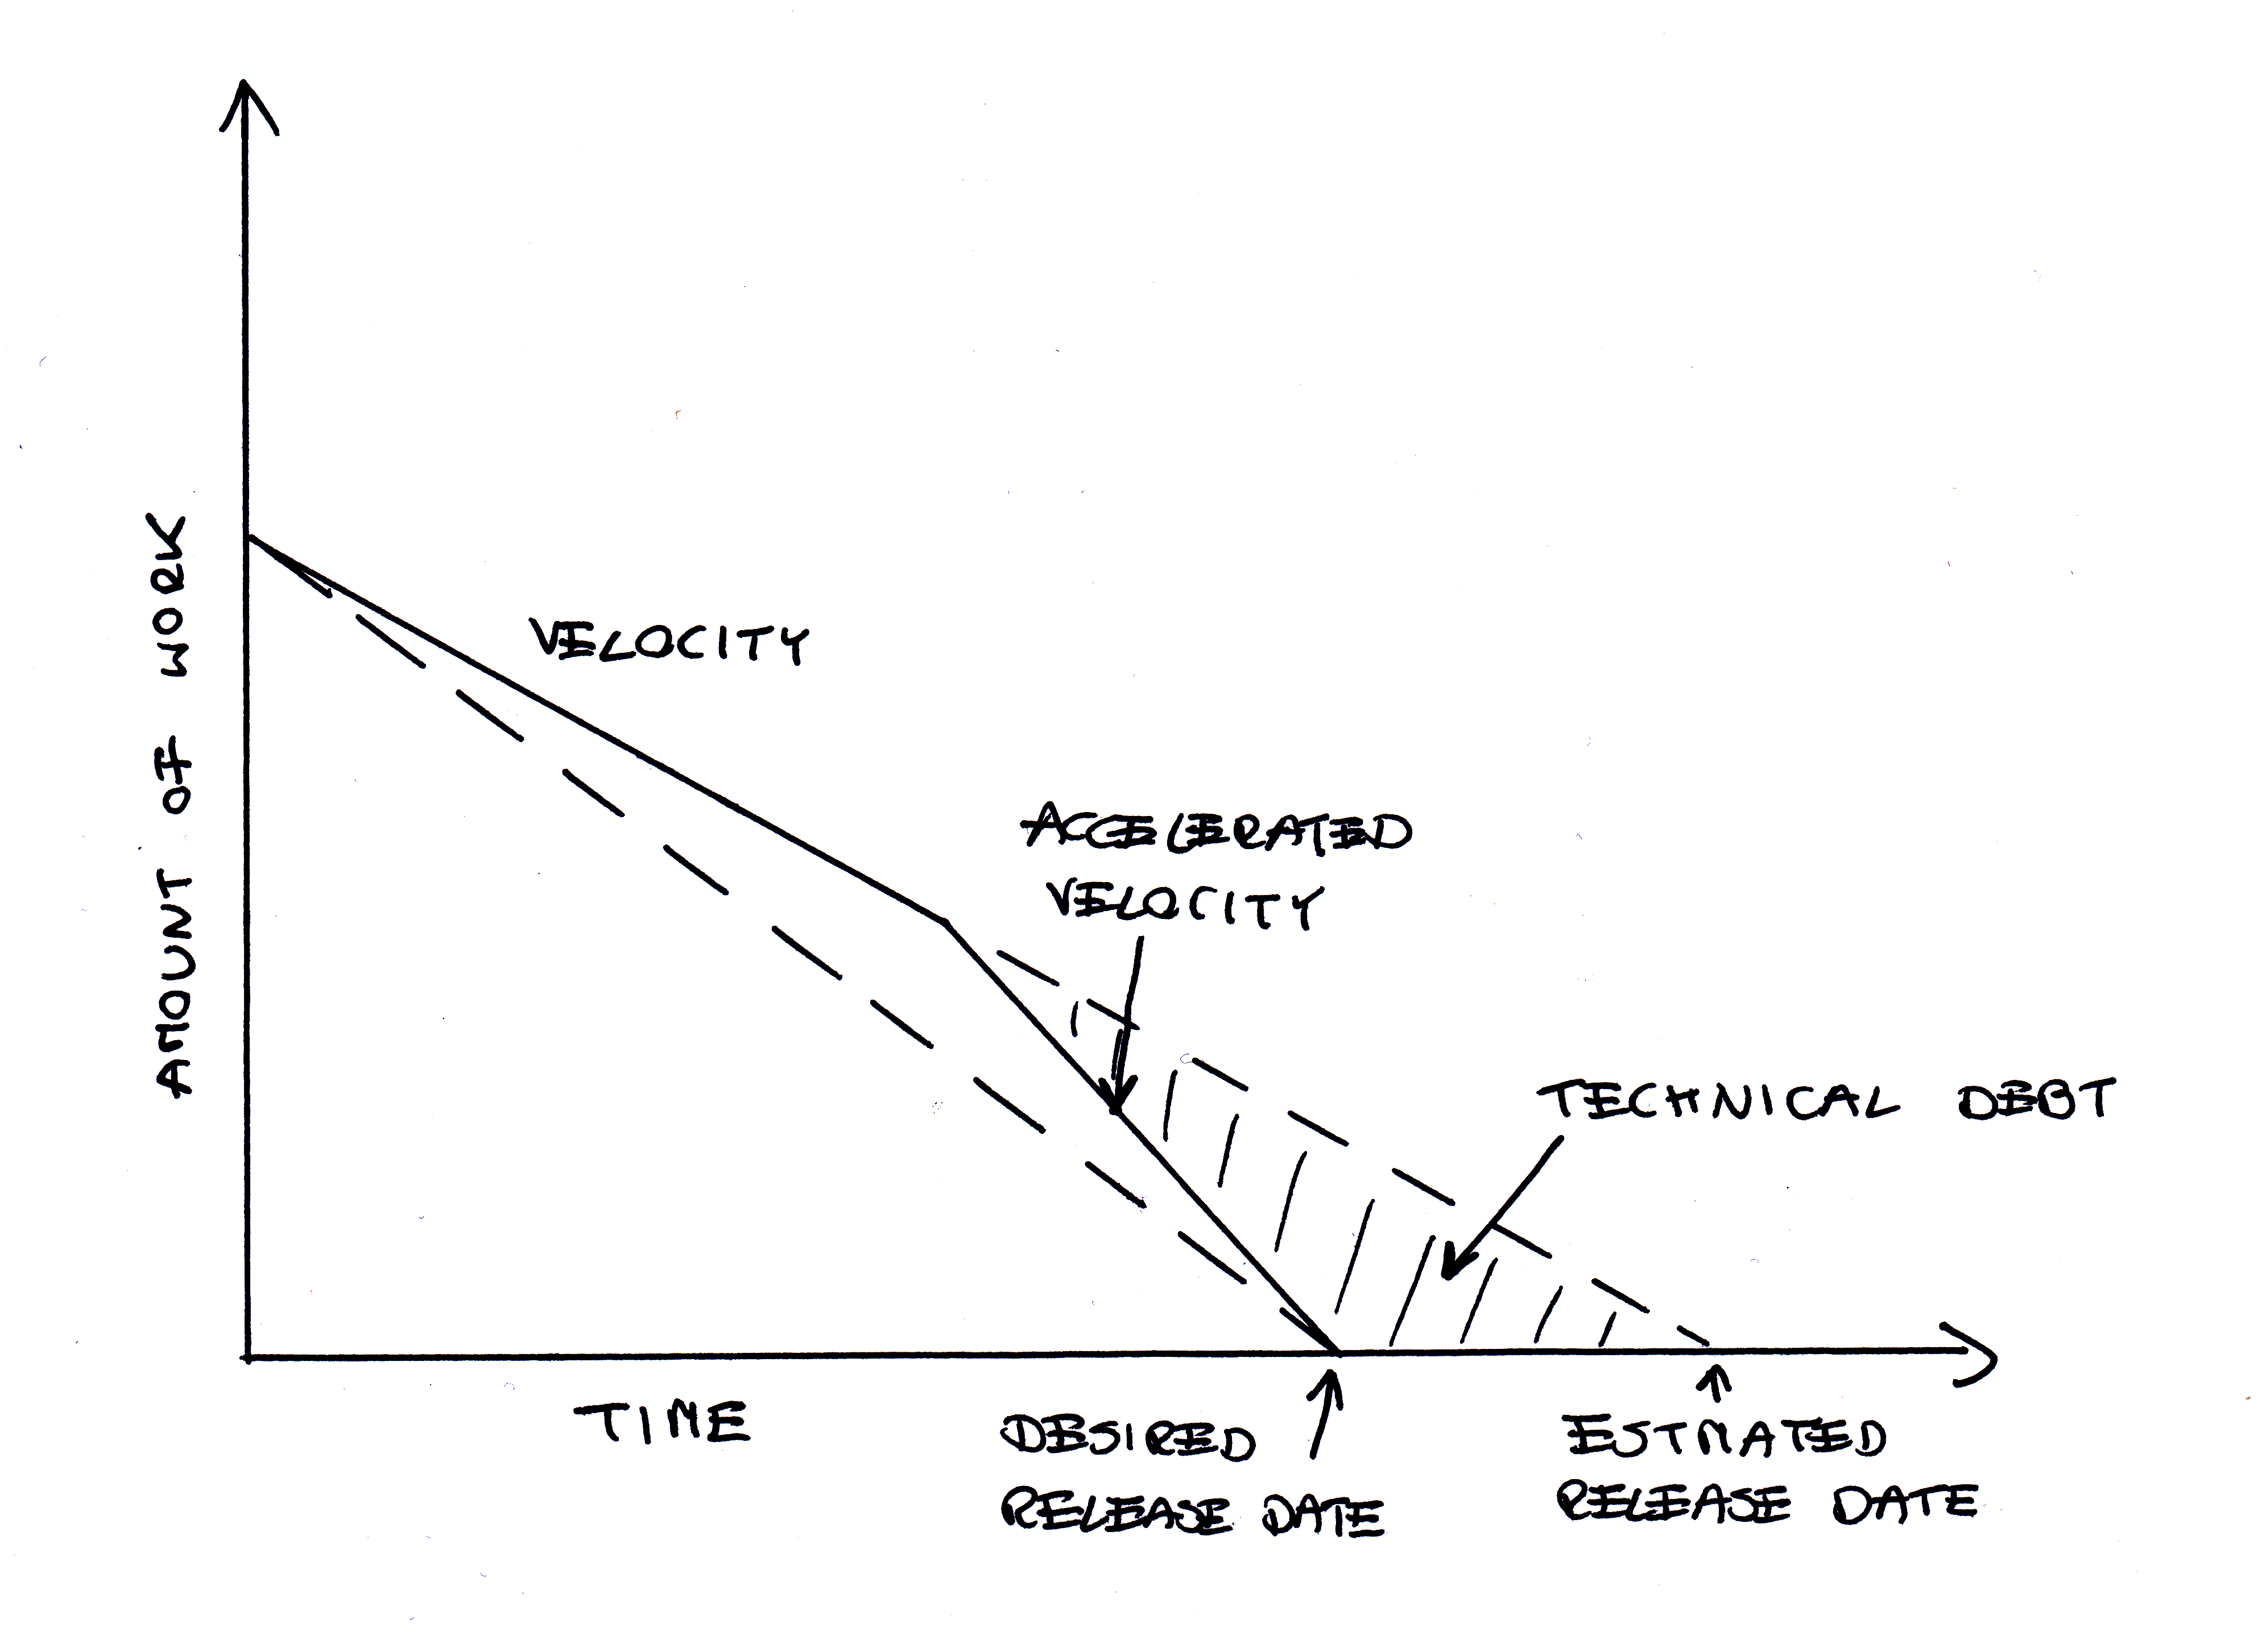 technical_debt_accelerated_velocity